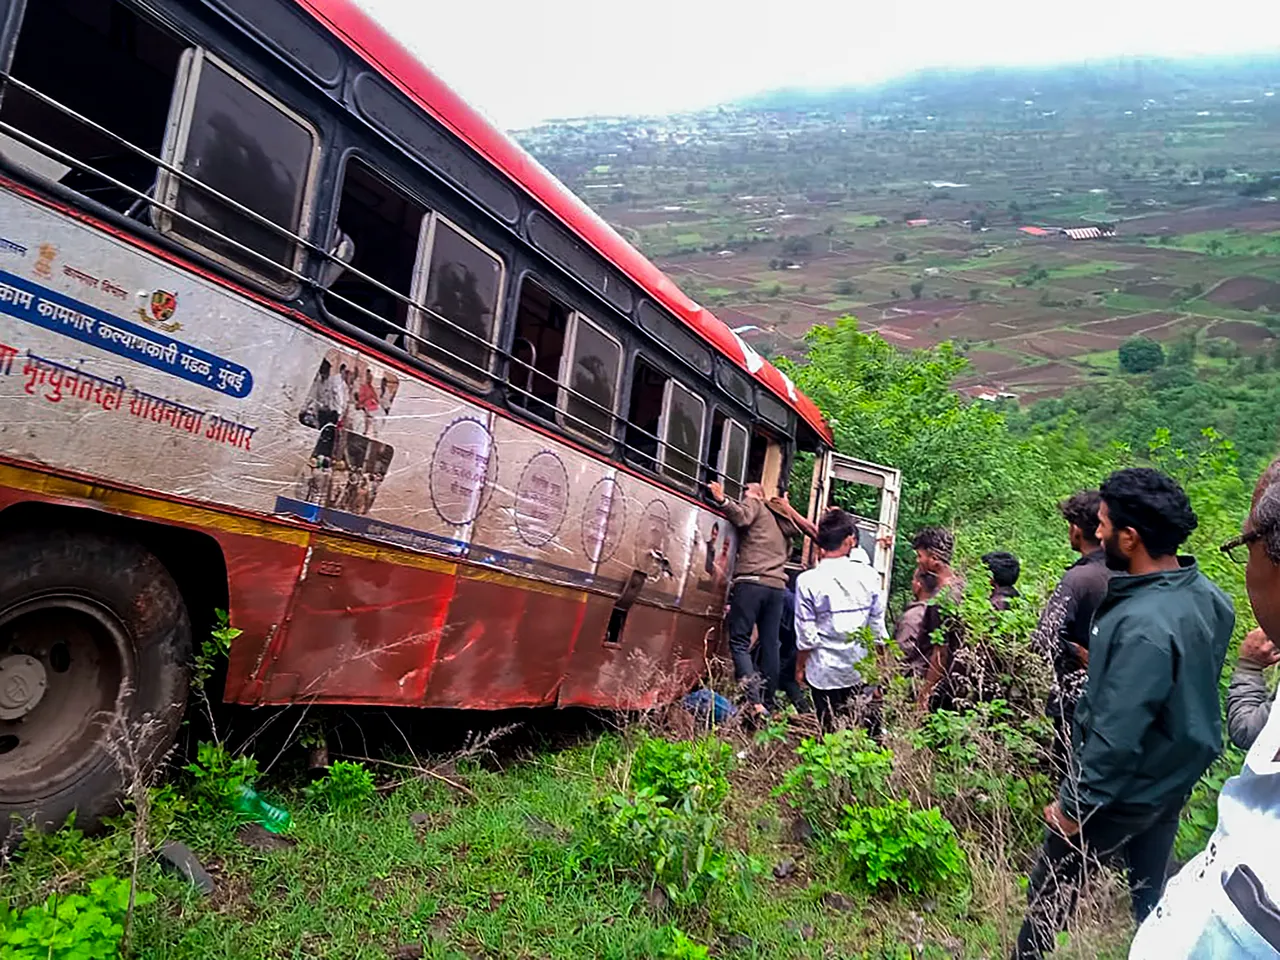 A Maharashtra State Road Transport Corporation (MSRTC) bus lies damaged after falling into a deep gorge, in Nashik district